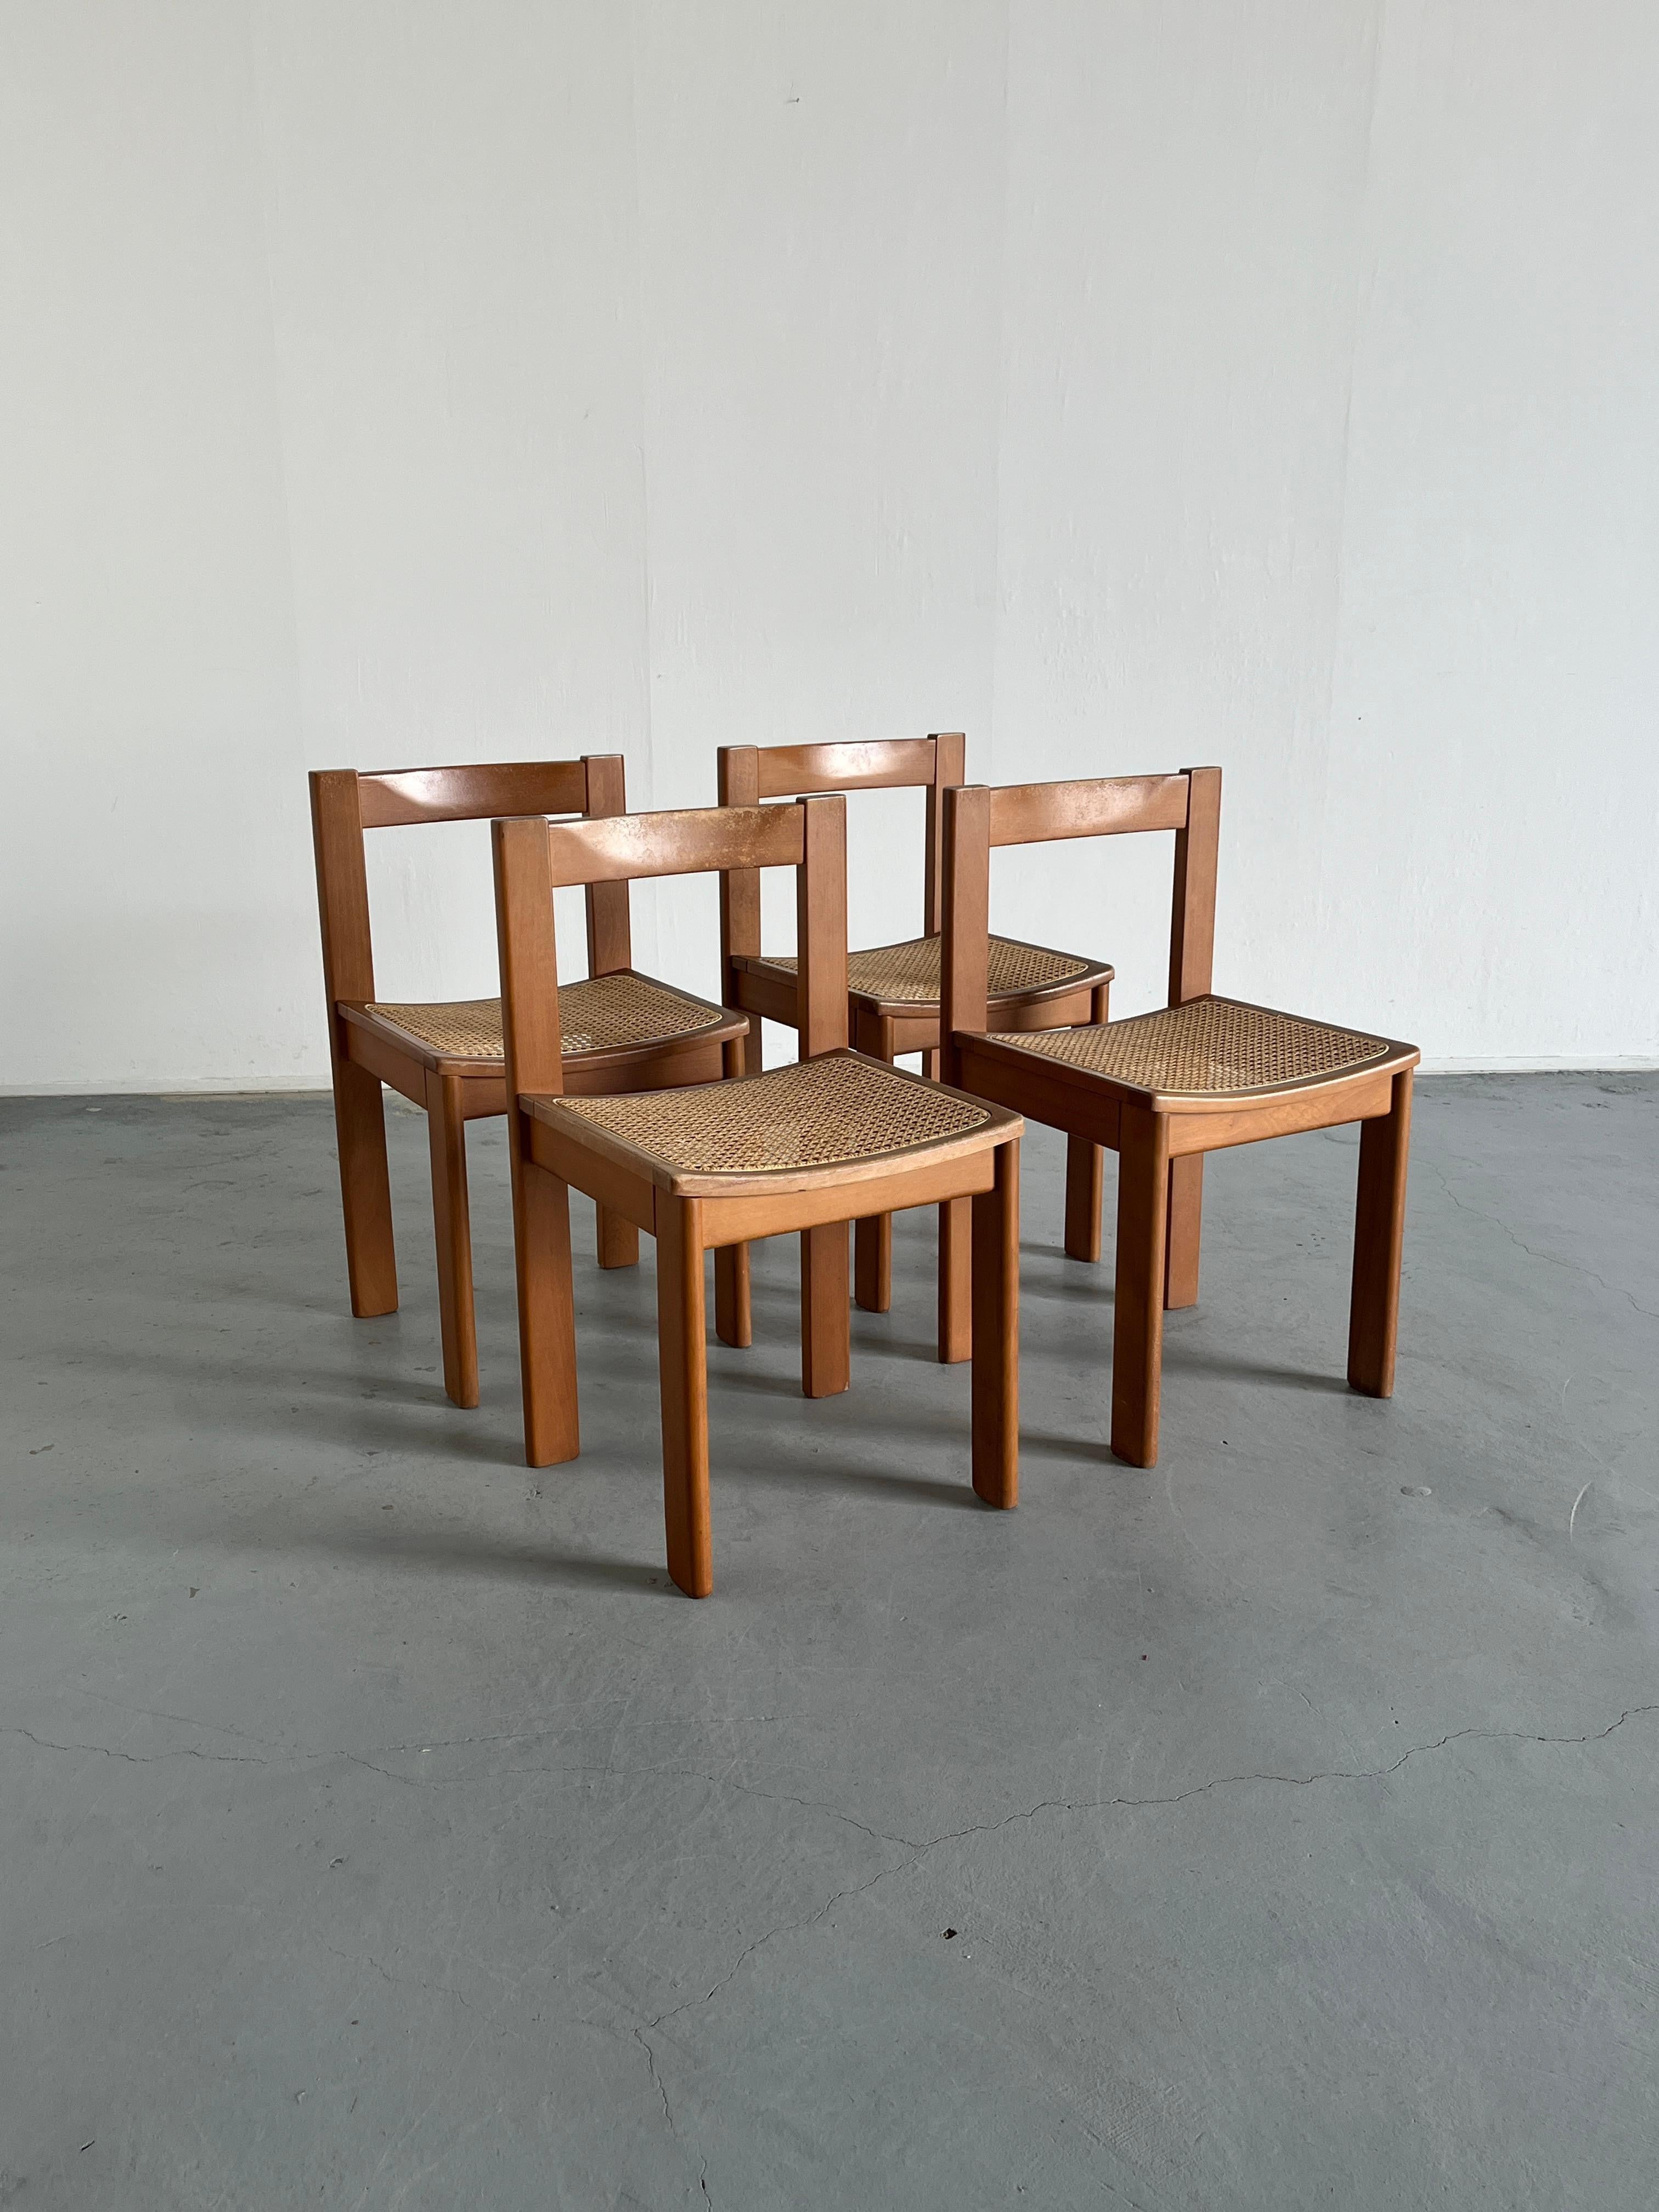 European Set of 4 Vintage Mid-Century Modern Constructivist Wooden Dining Chairs, 1960s For Sale